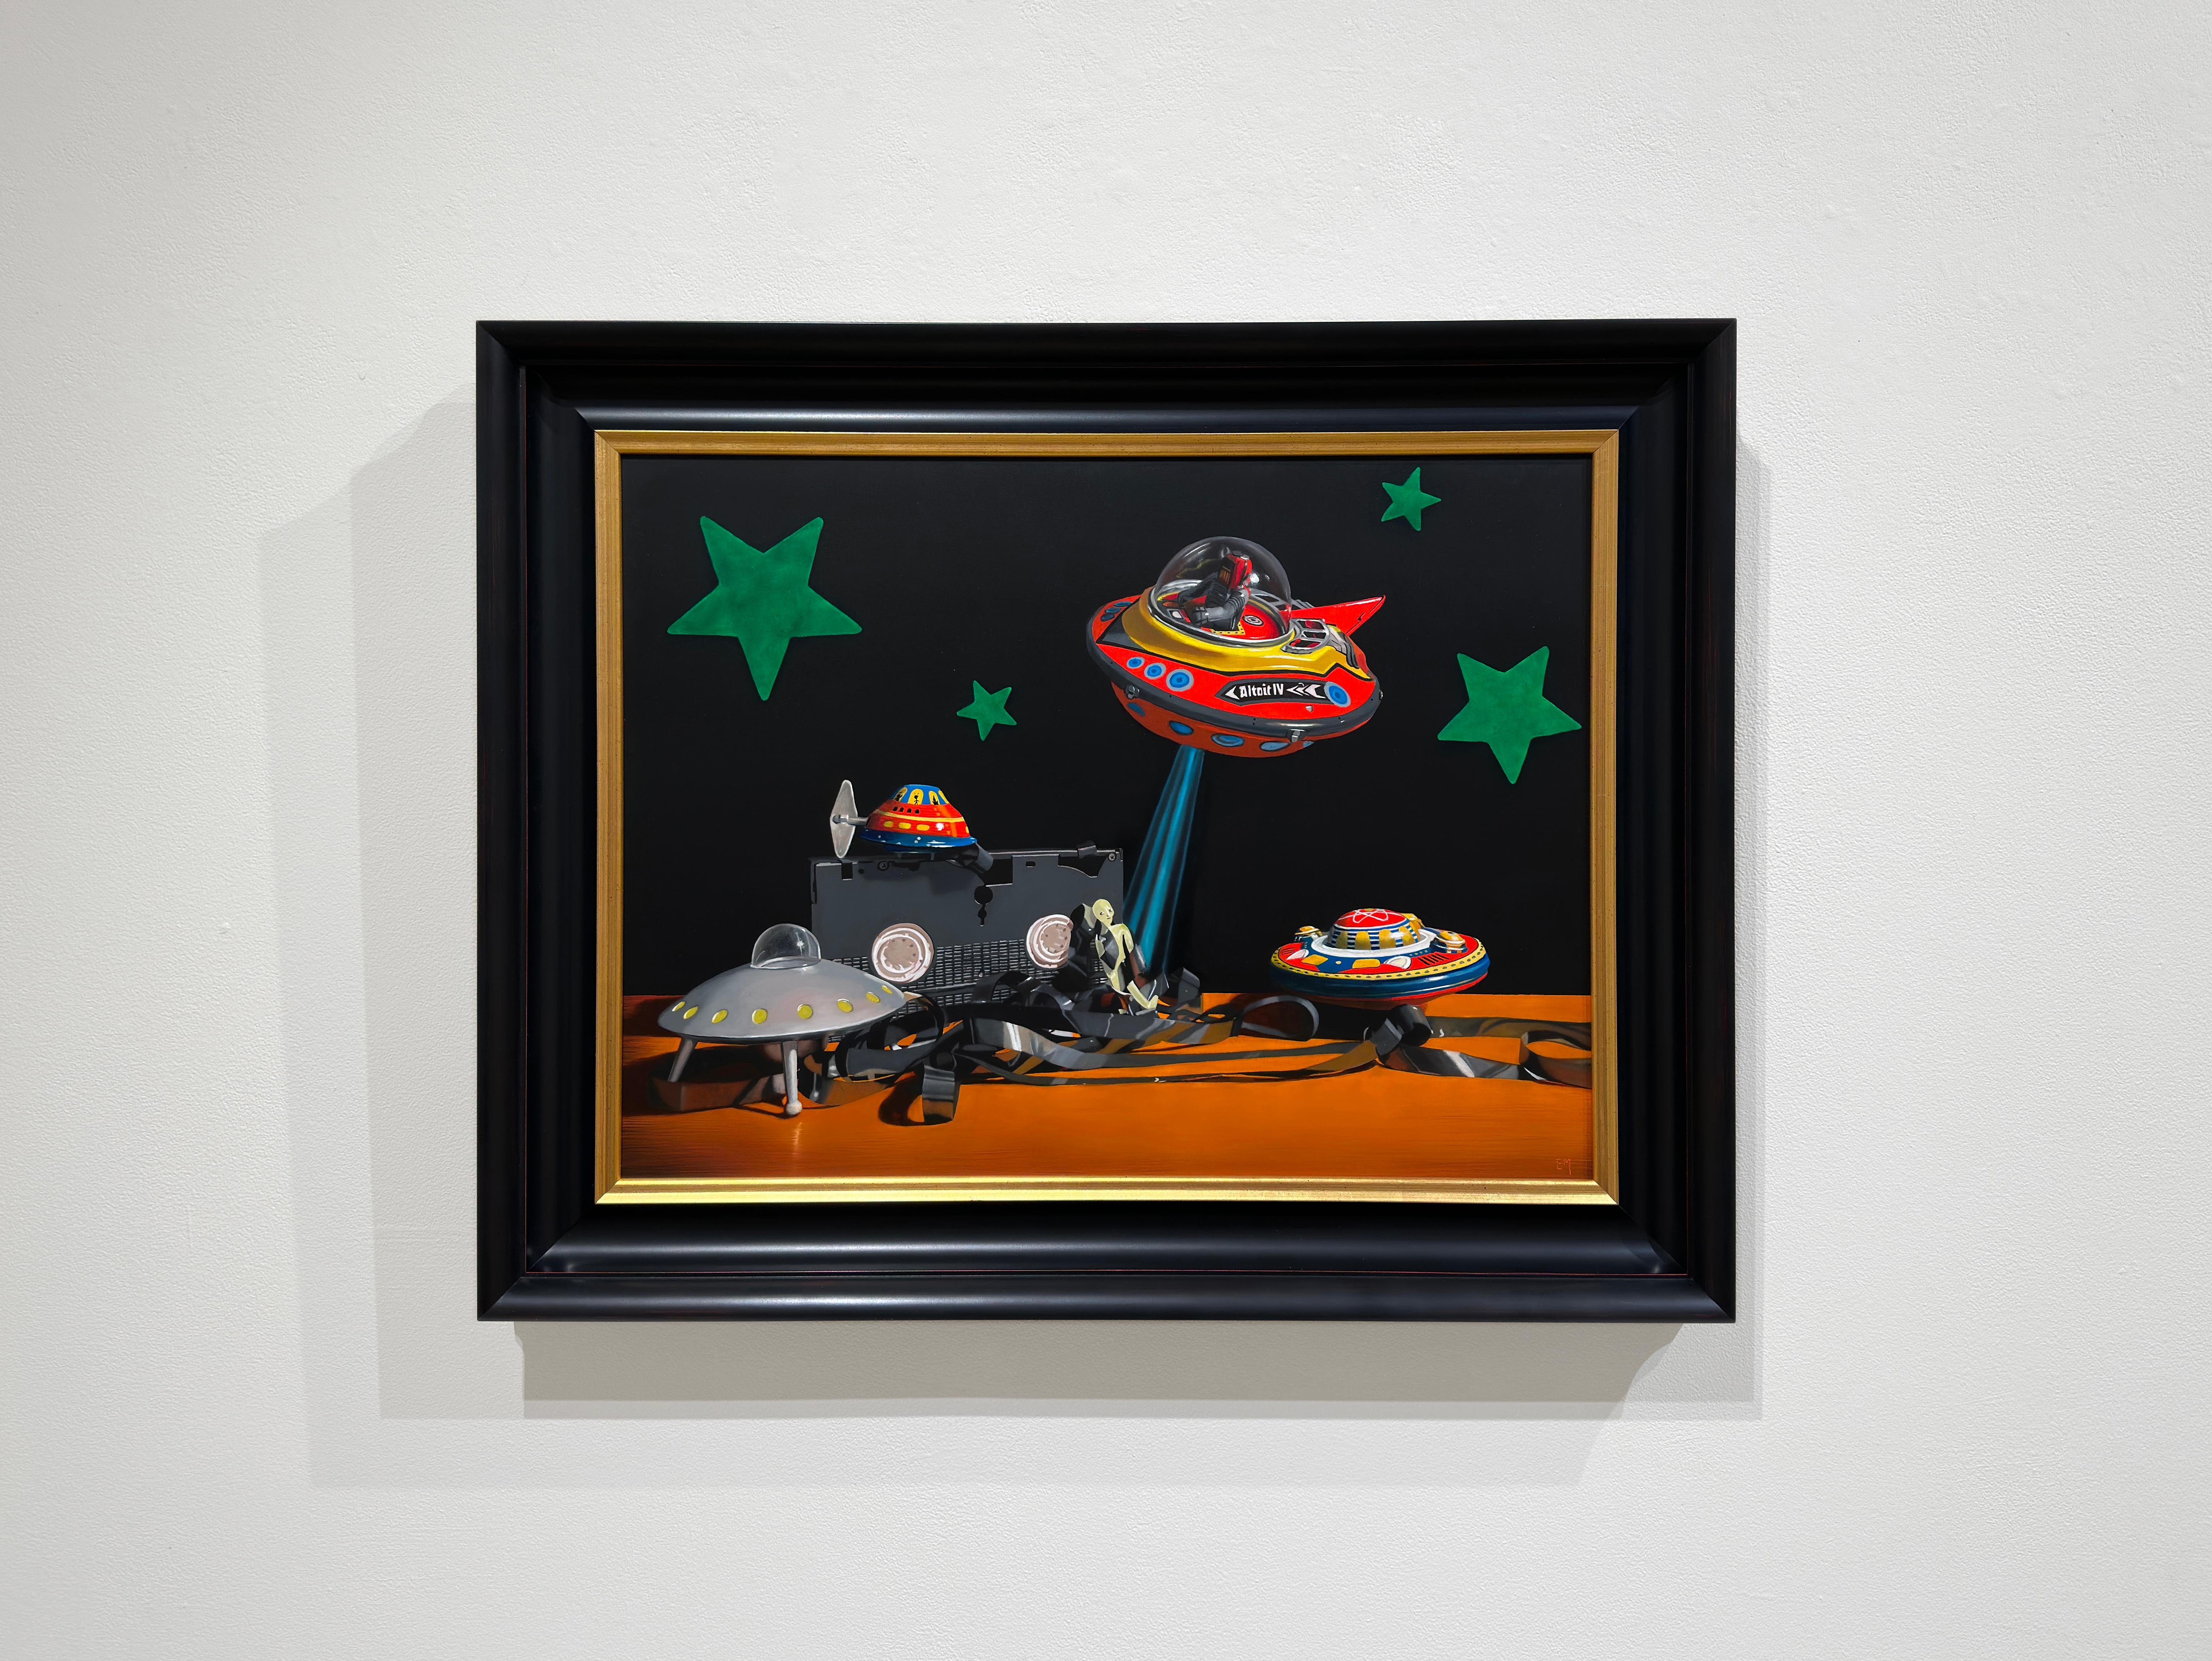 CAUGHT ON TAPE - Contemporary Realism / Still Life with Classic Toys / Humor - Painting by Elizabeth McGhee